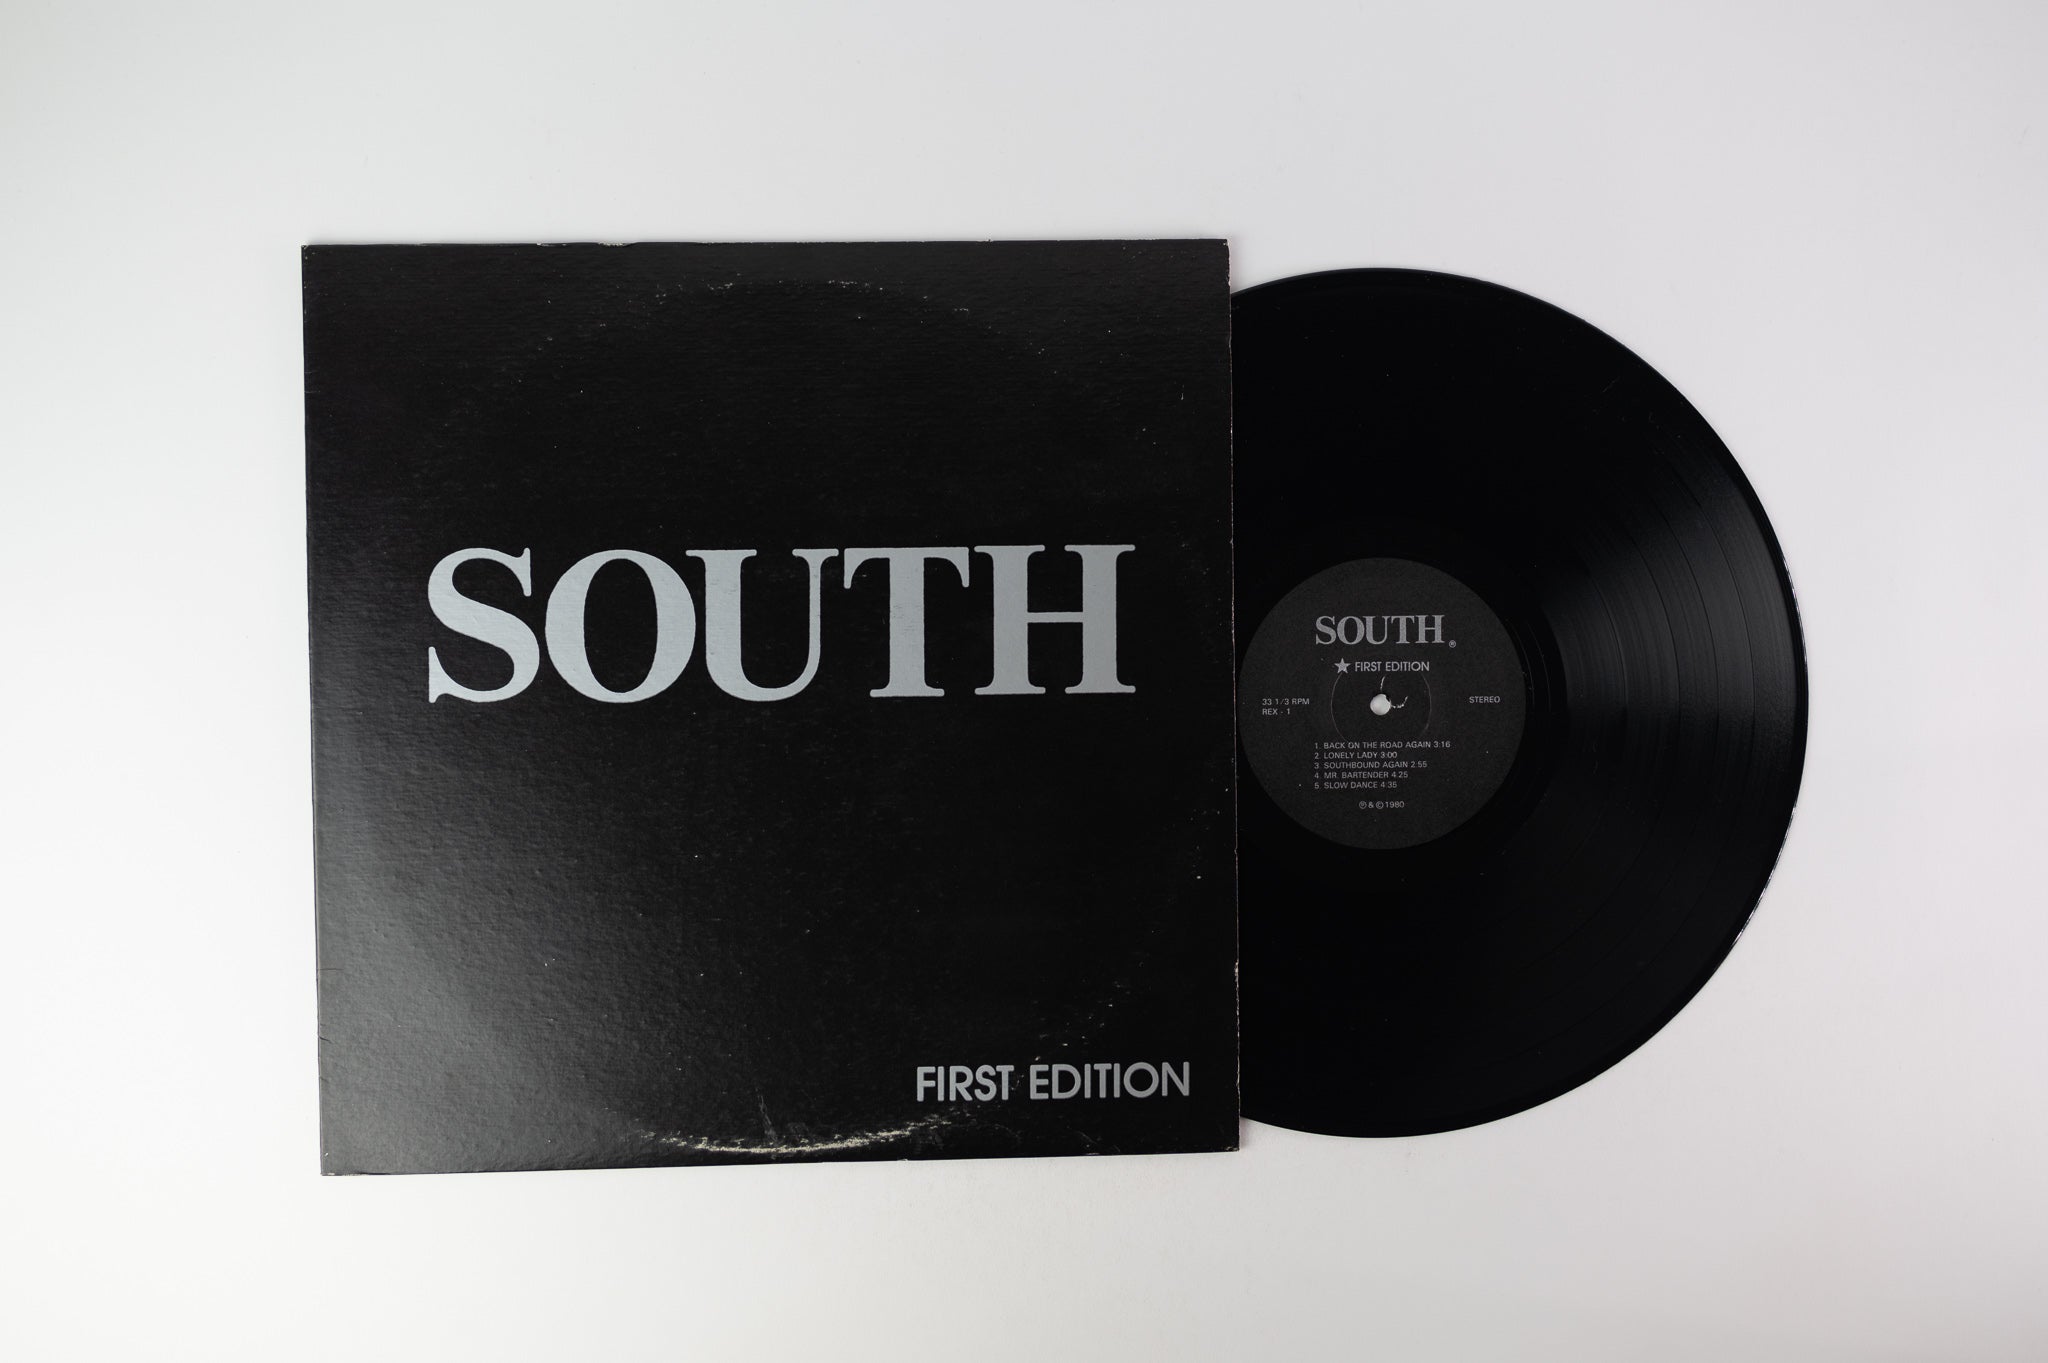 South - First Edition on Flying V